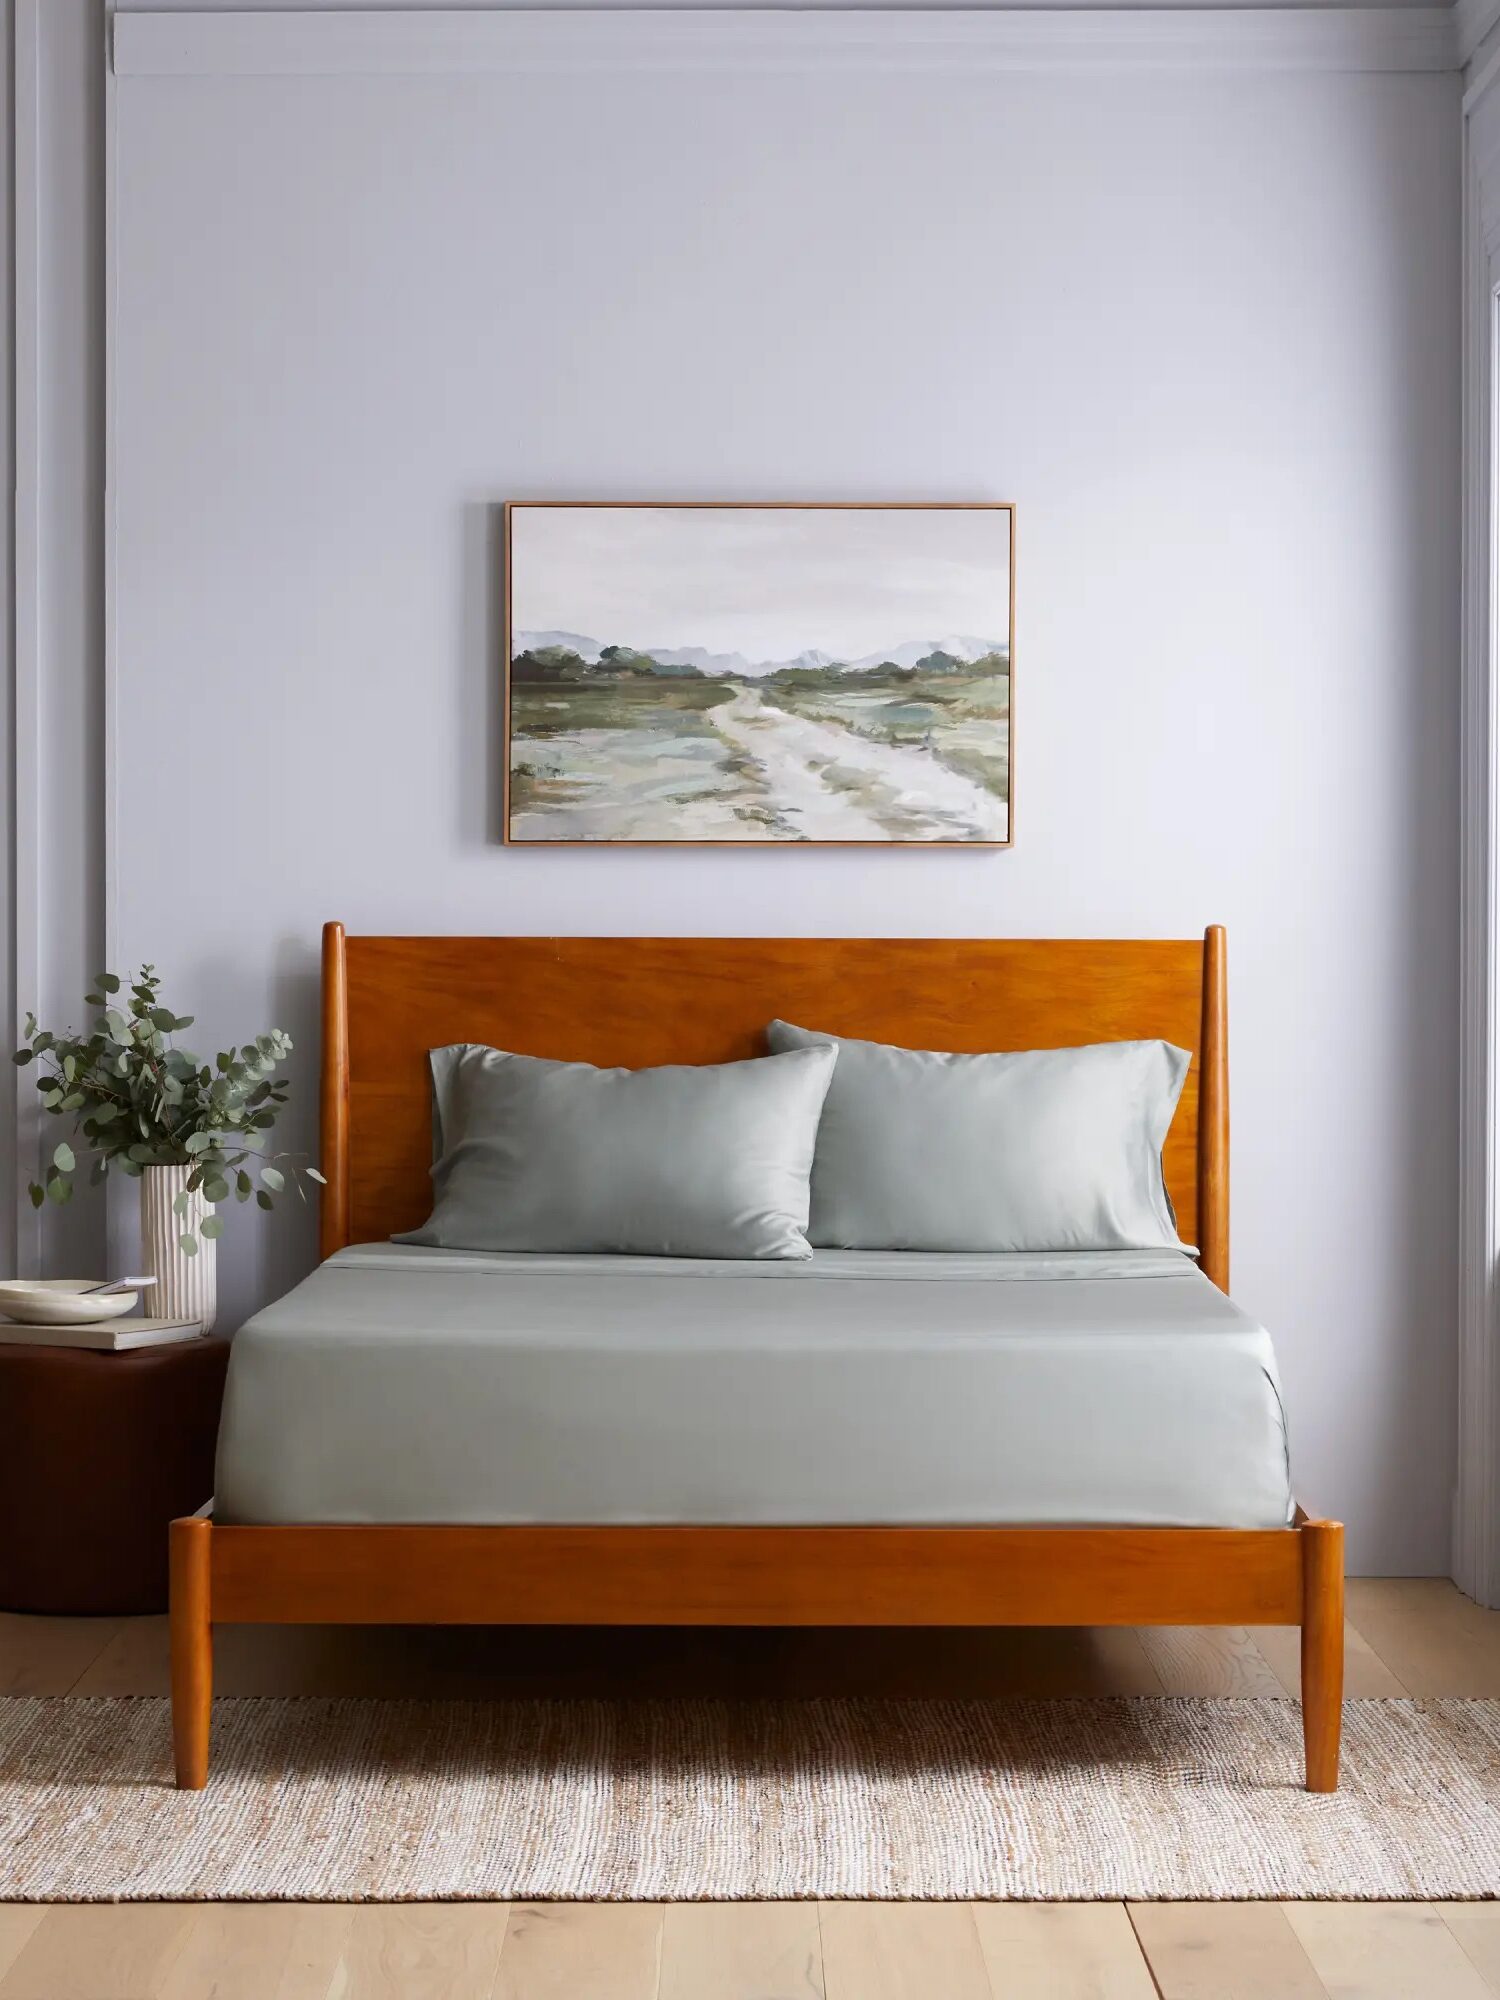 A neatly made bed with a wooden frame and light gray bedding is centered against a white wall. A landscape painting hangs above the bed, and a potted plant sits on a side table to the left.